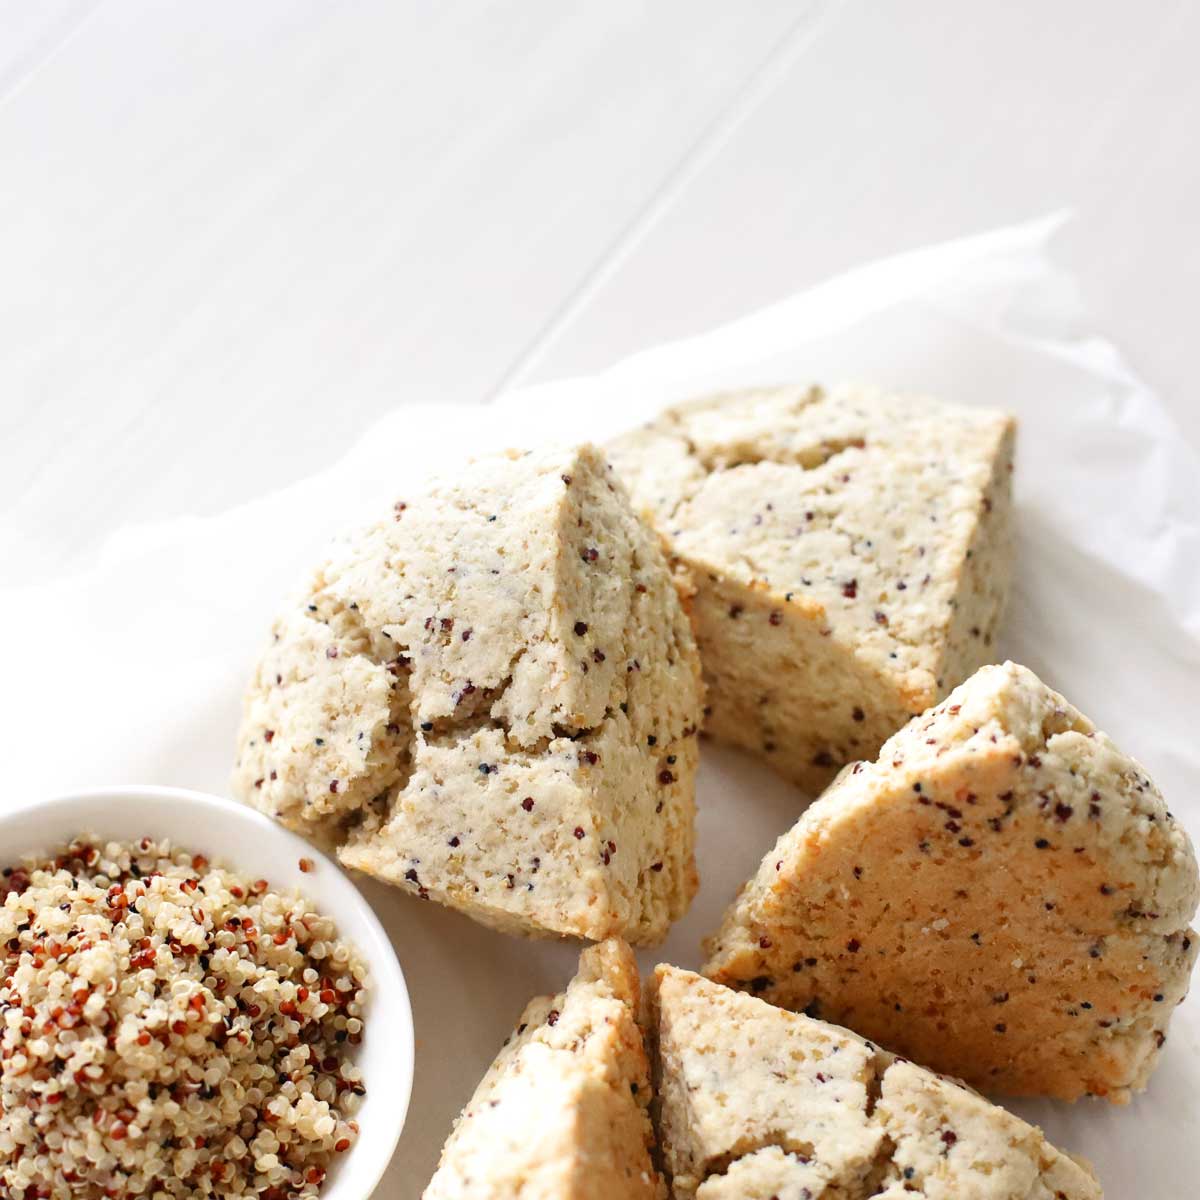 Nutty and Wholesome: Quinoa Scones for a Healthy, Vegan Twist - Cauliflower Everything Bagel Scones